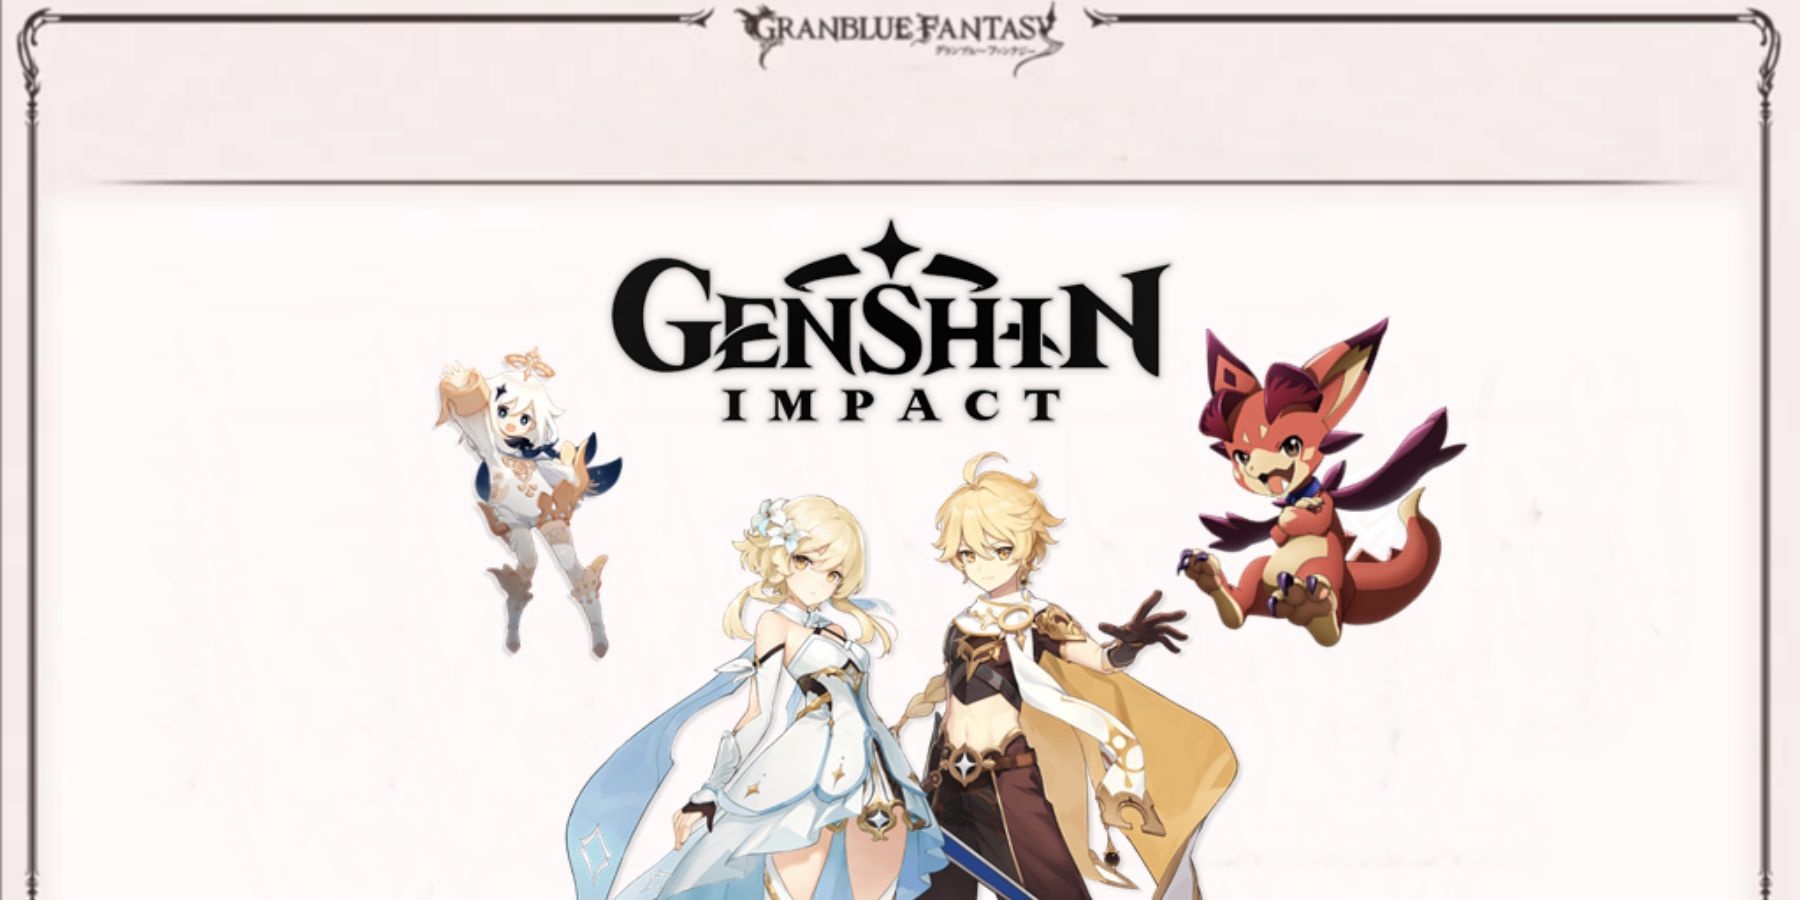 Do you guys think that Granblue Fantasy relink will be a threat to Genshin  Impact? : r/Genshin_Impact